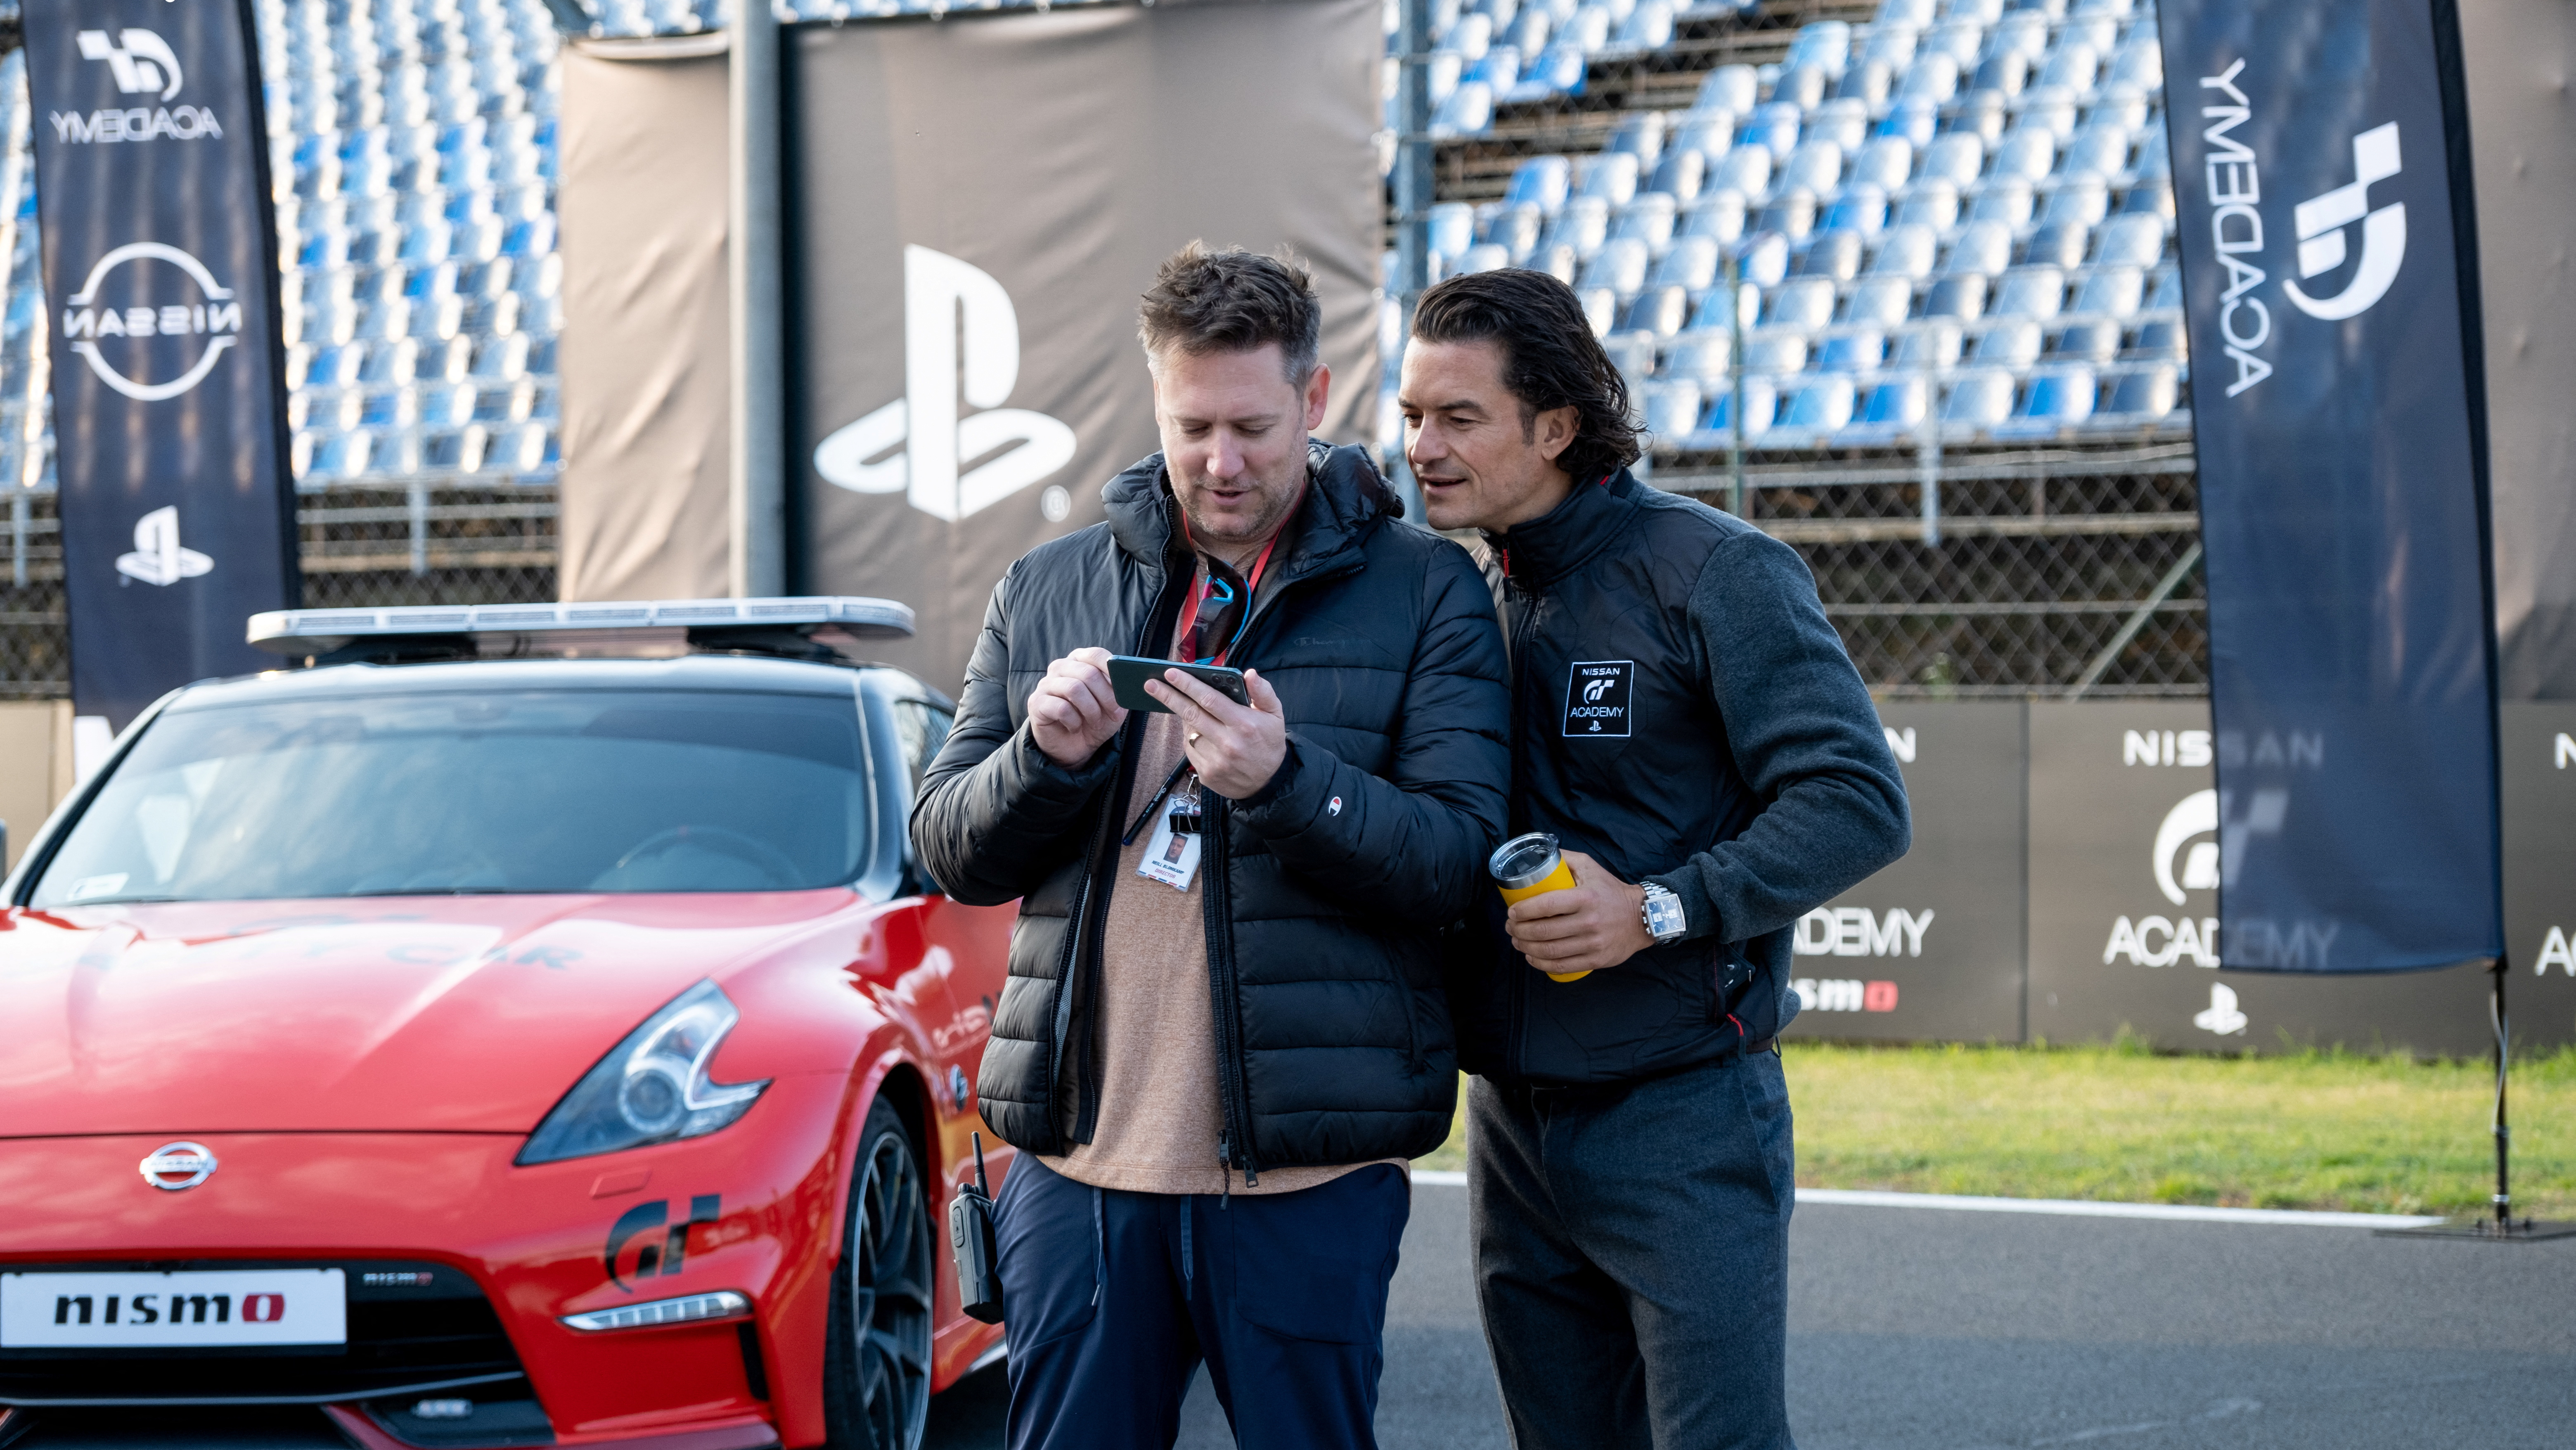 Focus: At CES 2023, Sony's 'Gran Turismo' flags new entertainment strategy